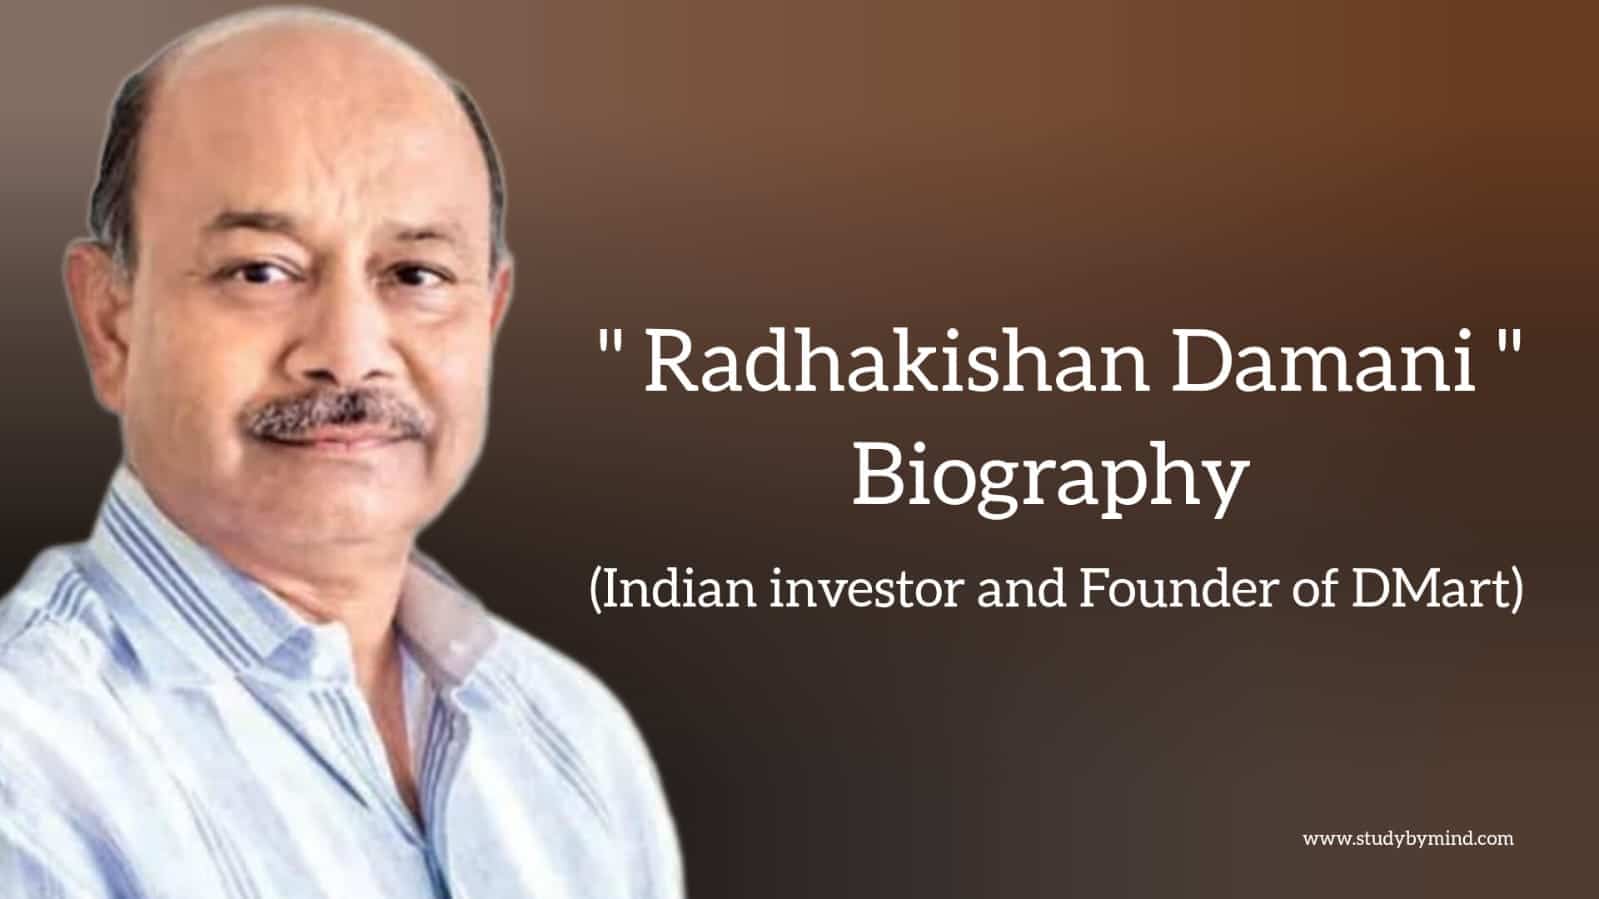 You are currently viewing Radhakishan Damani biography in english (Indian investor and founder of Dmart)